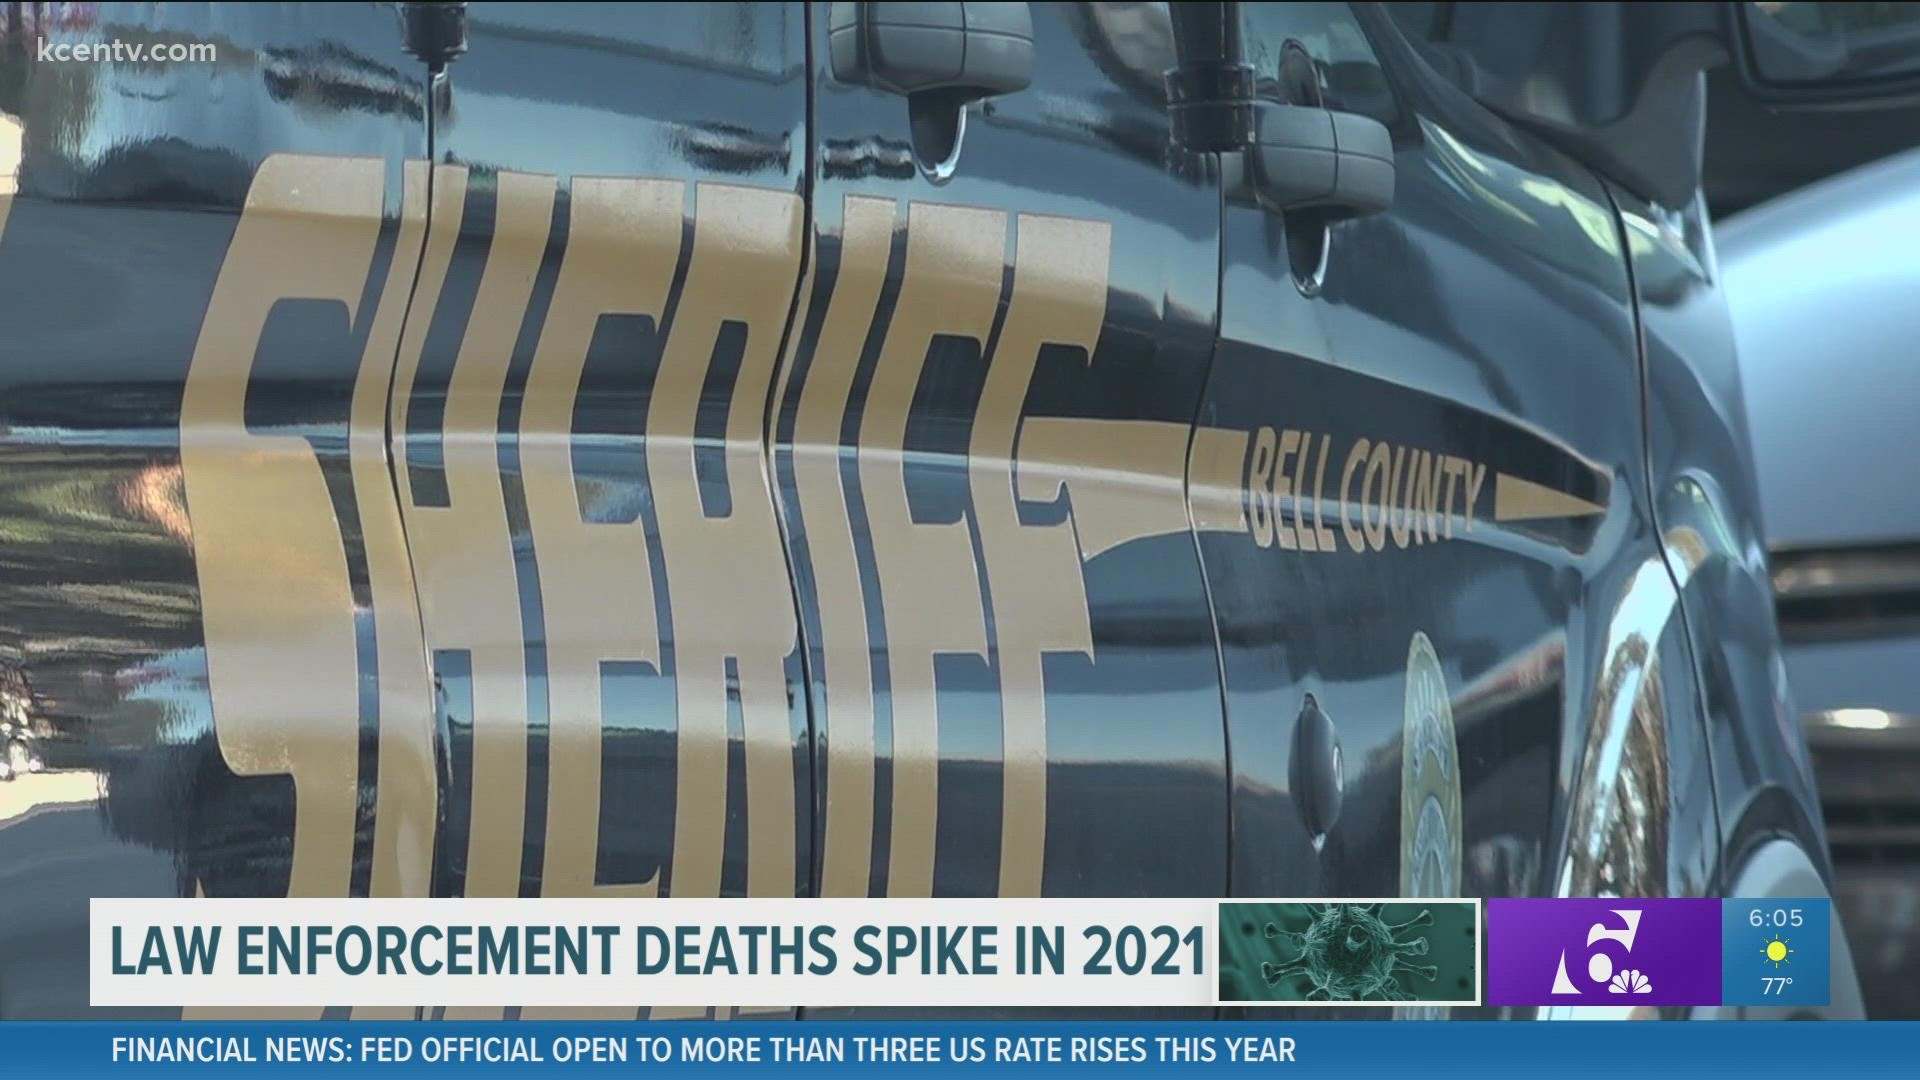 In 2021 the leading cause of death for Central Texas police was COVID-19.